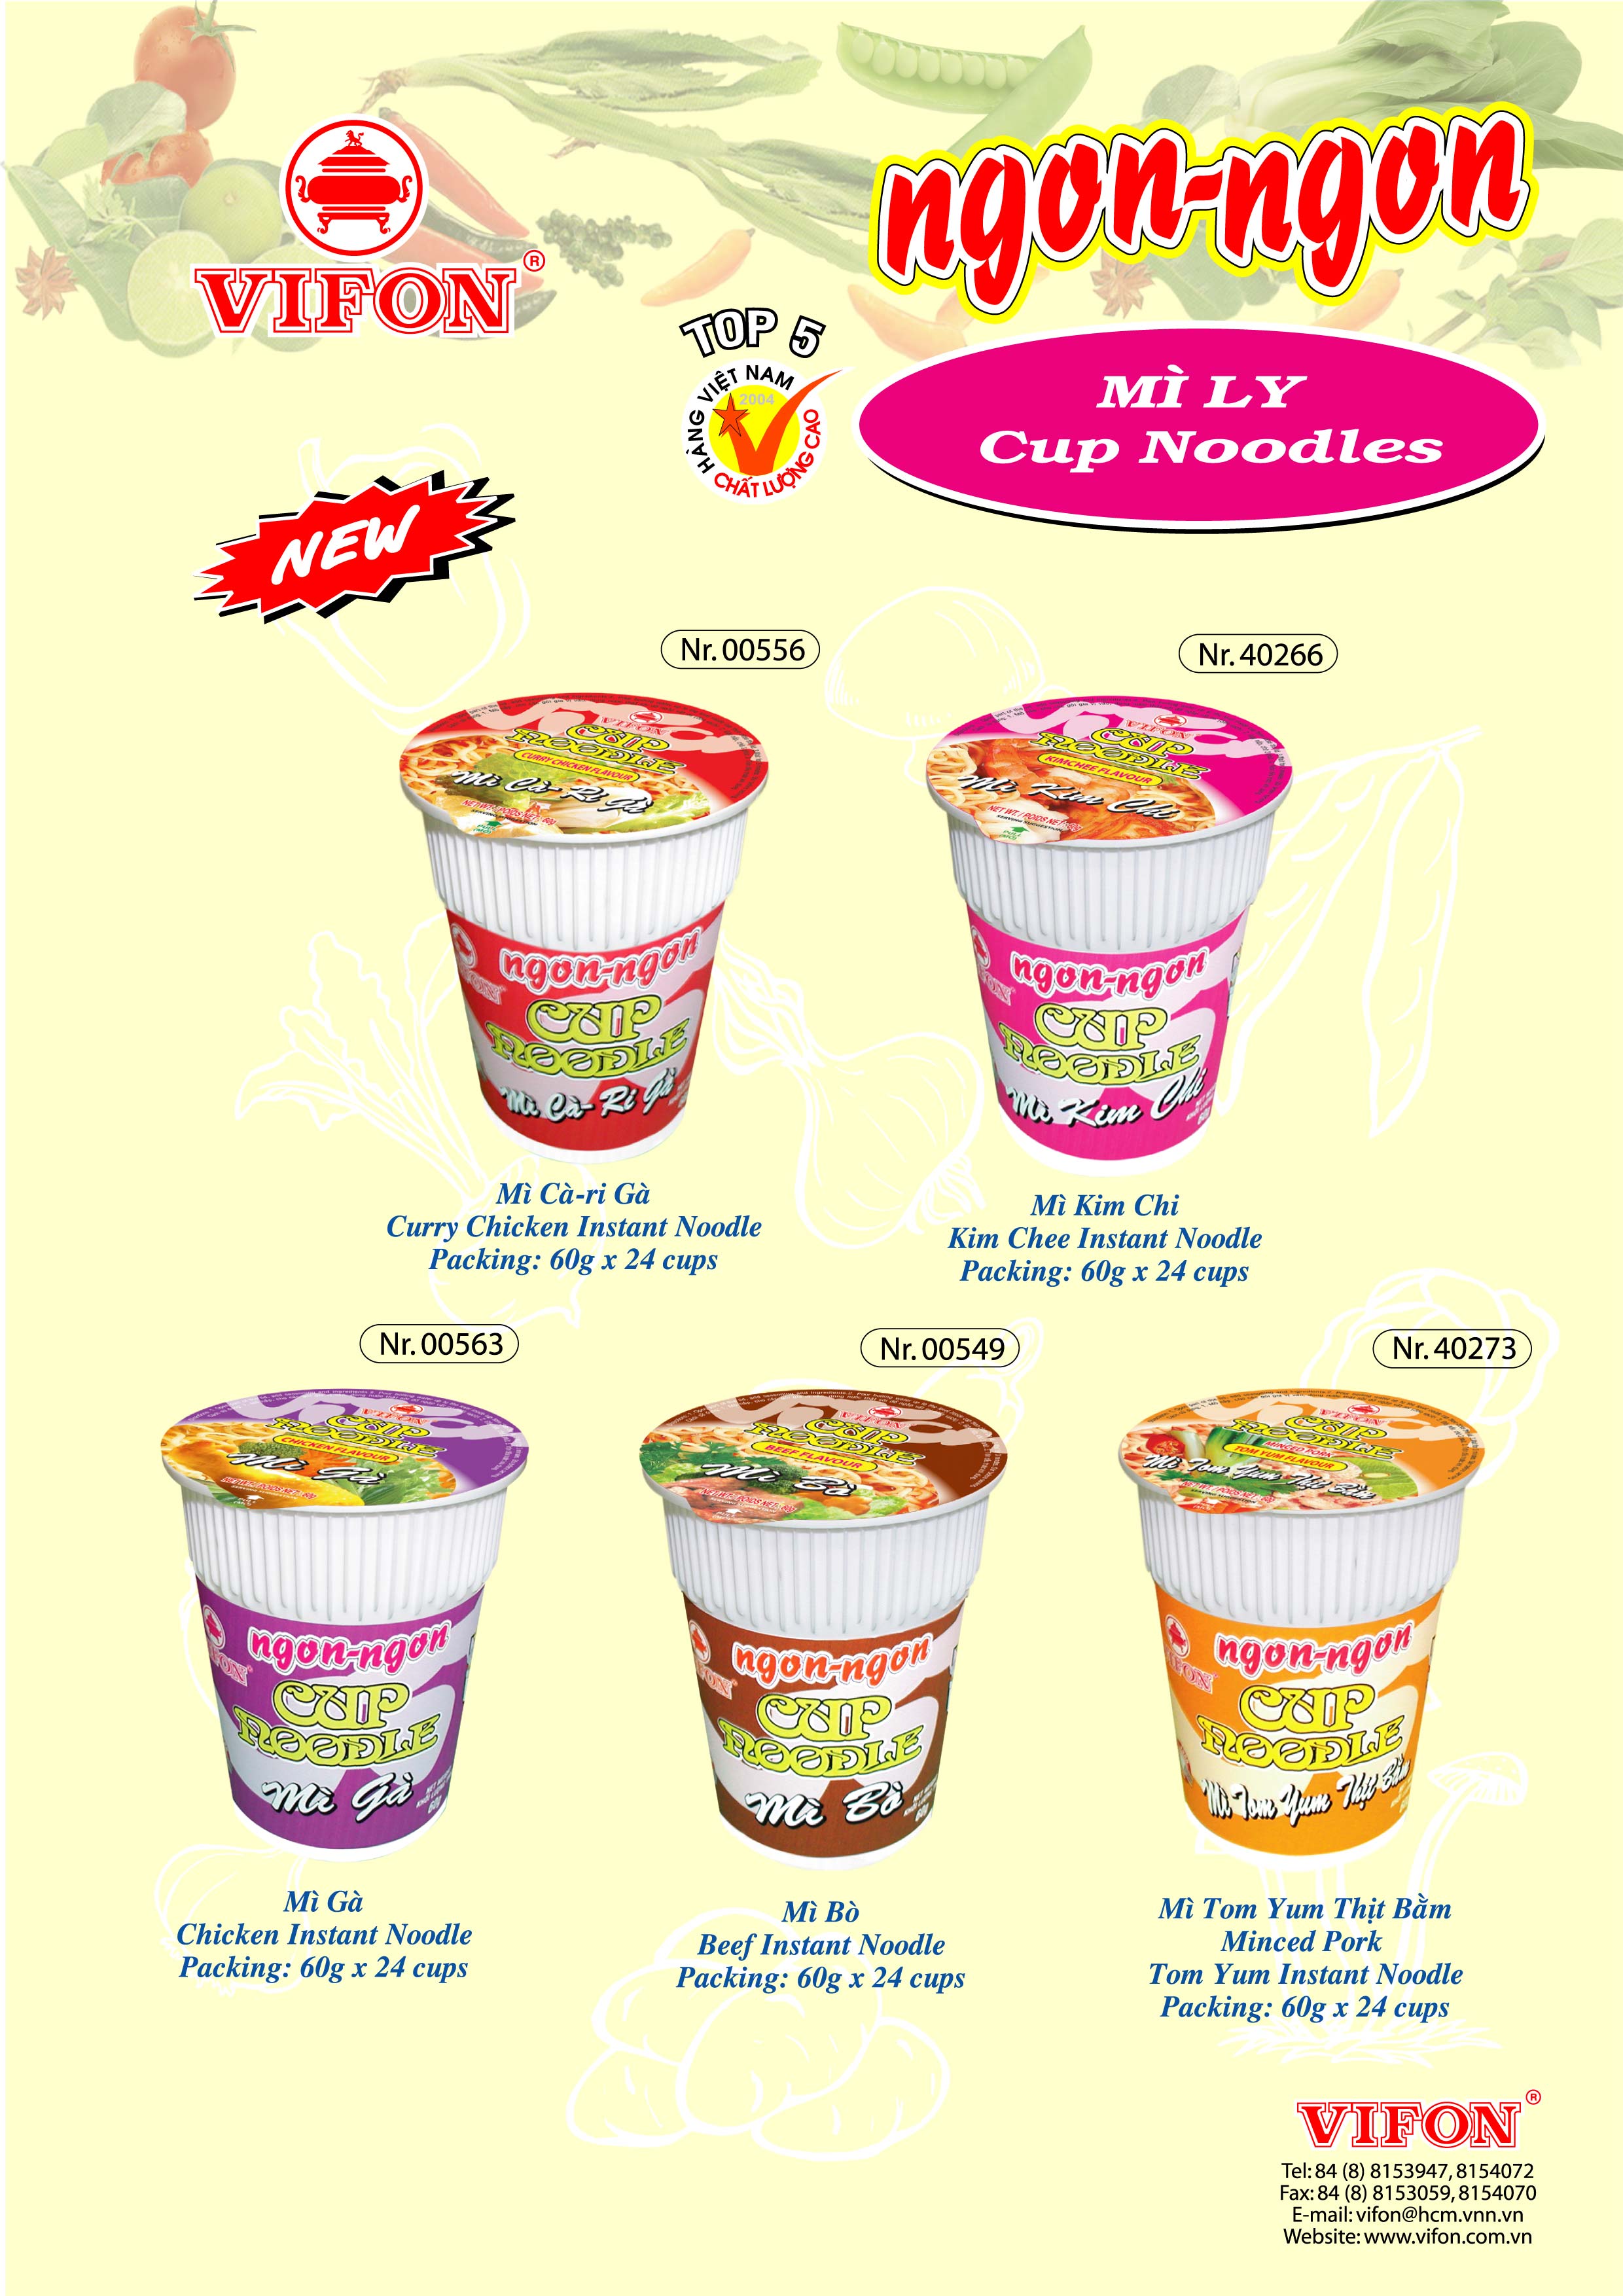 Instant noodles in cups